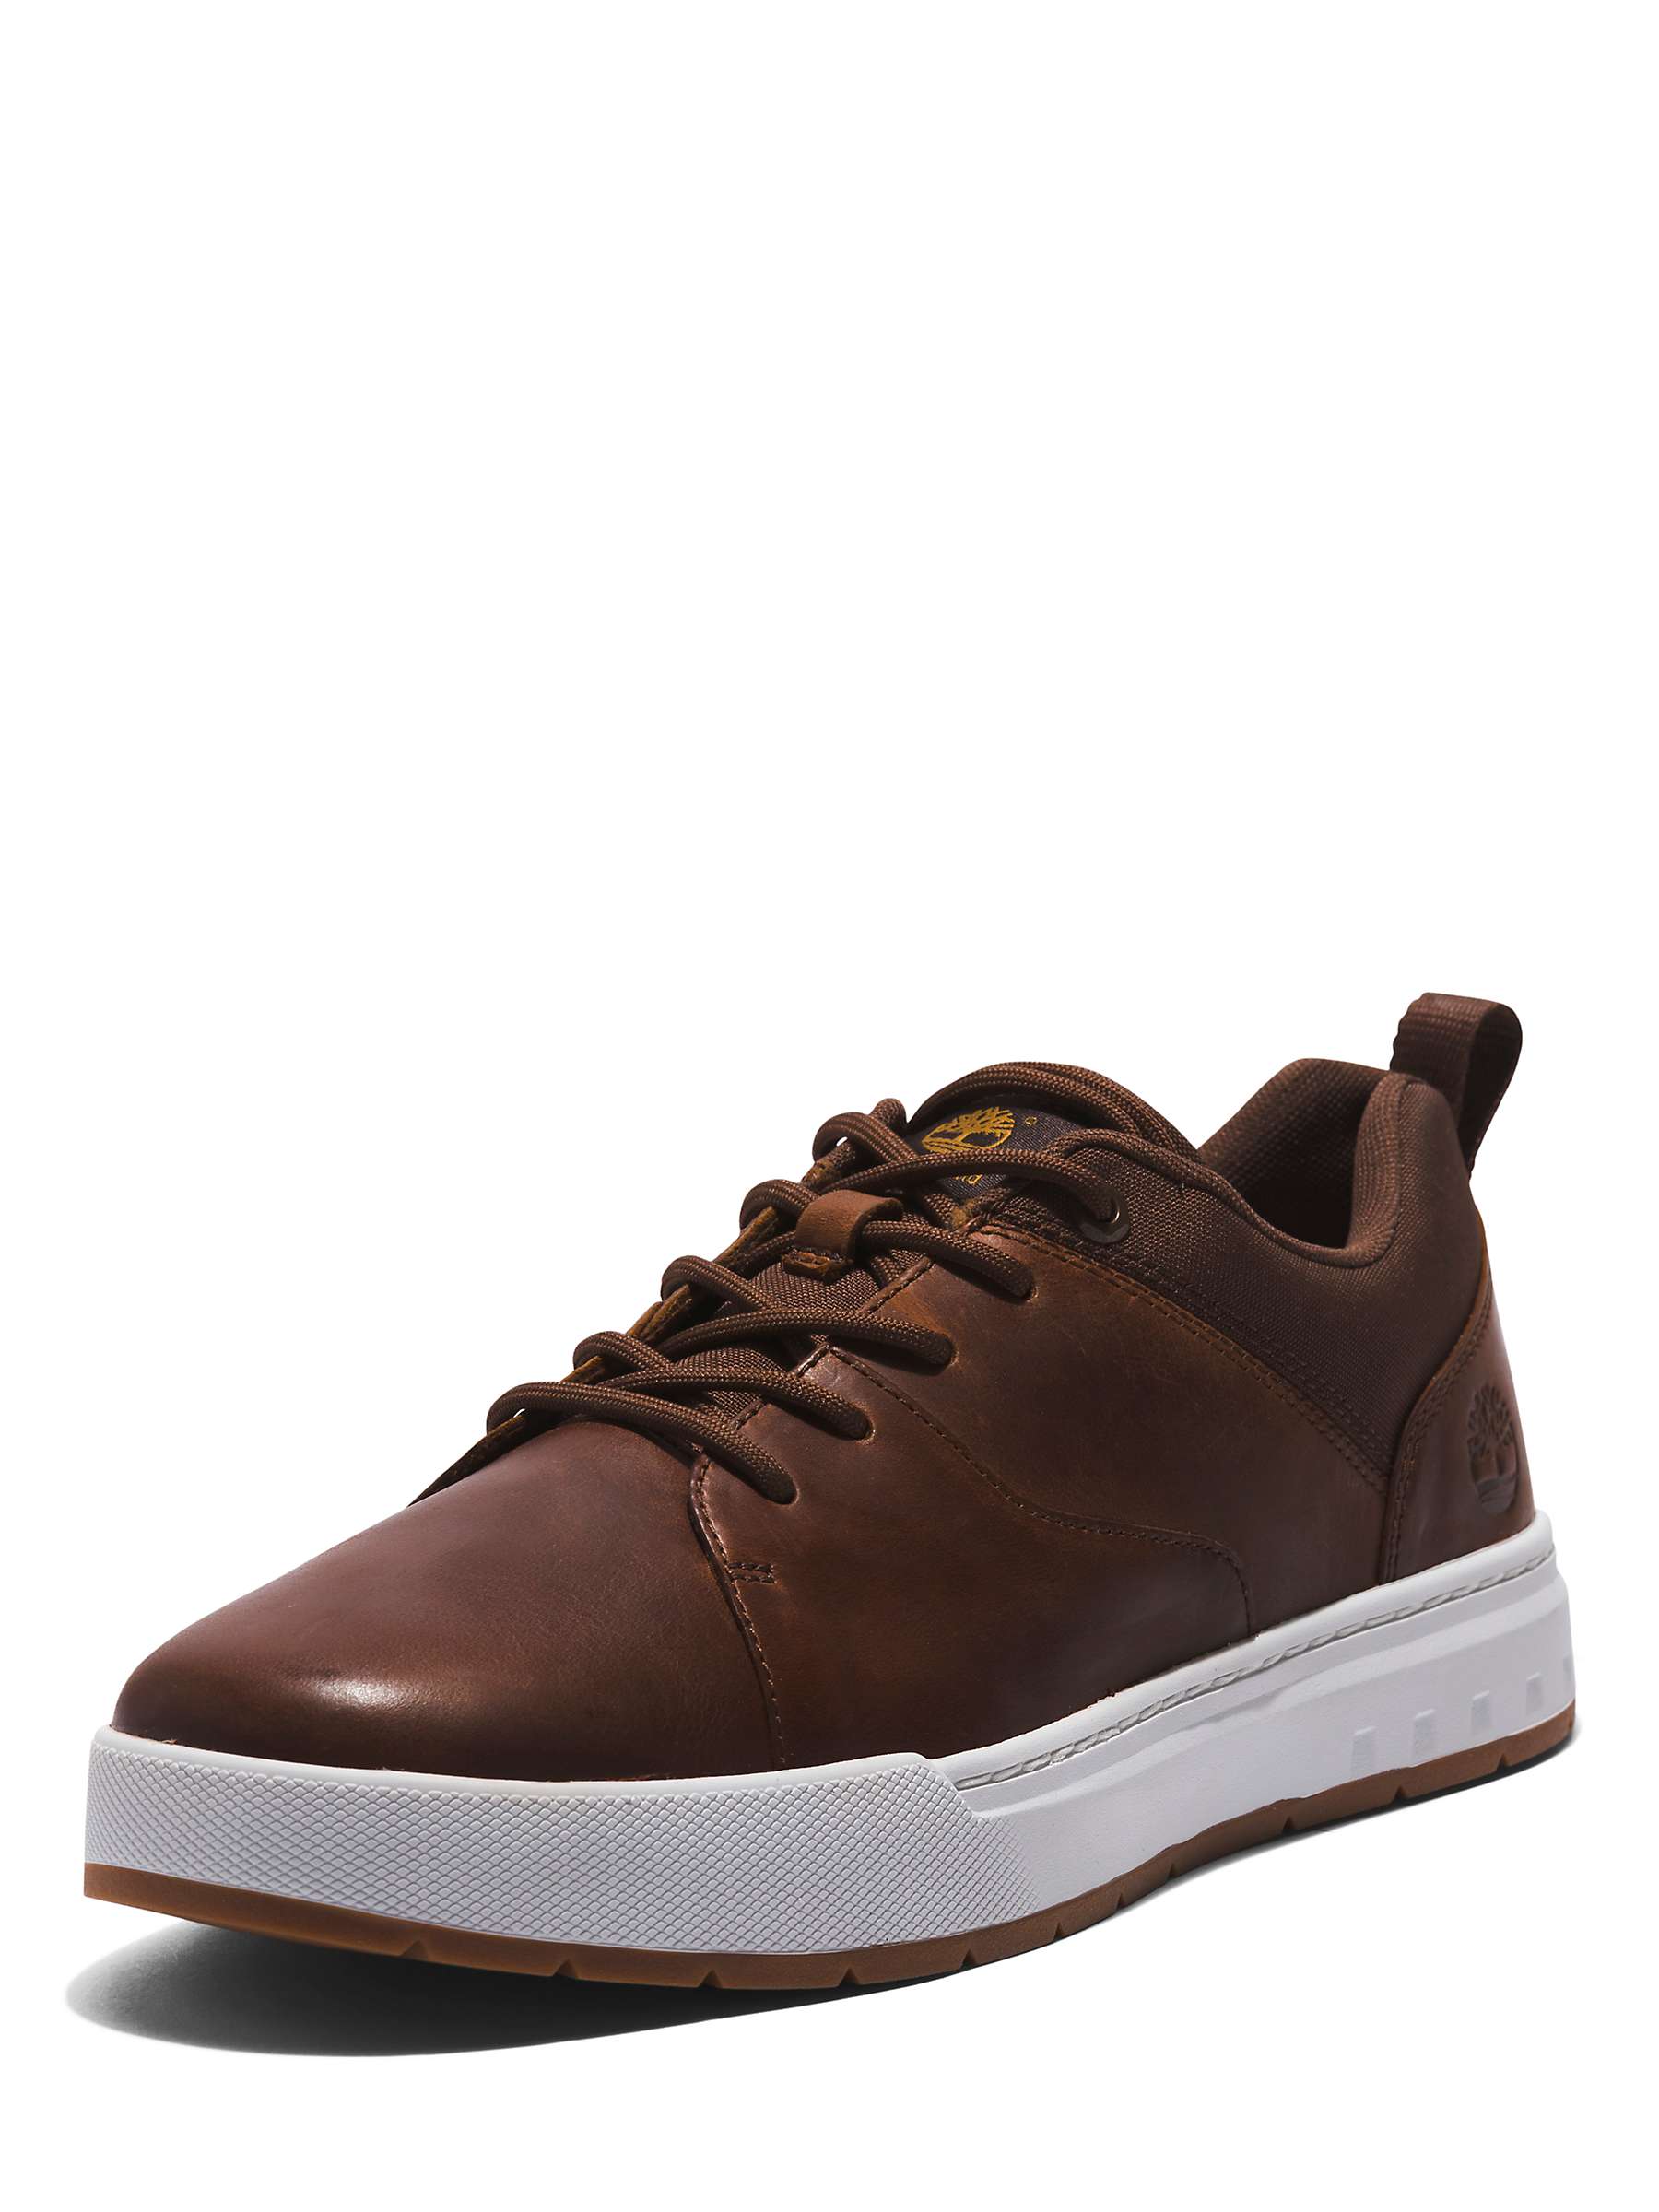 Timberland Maple Grove Trainers, Brown at John Lewis  Partners